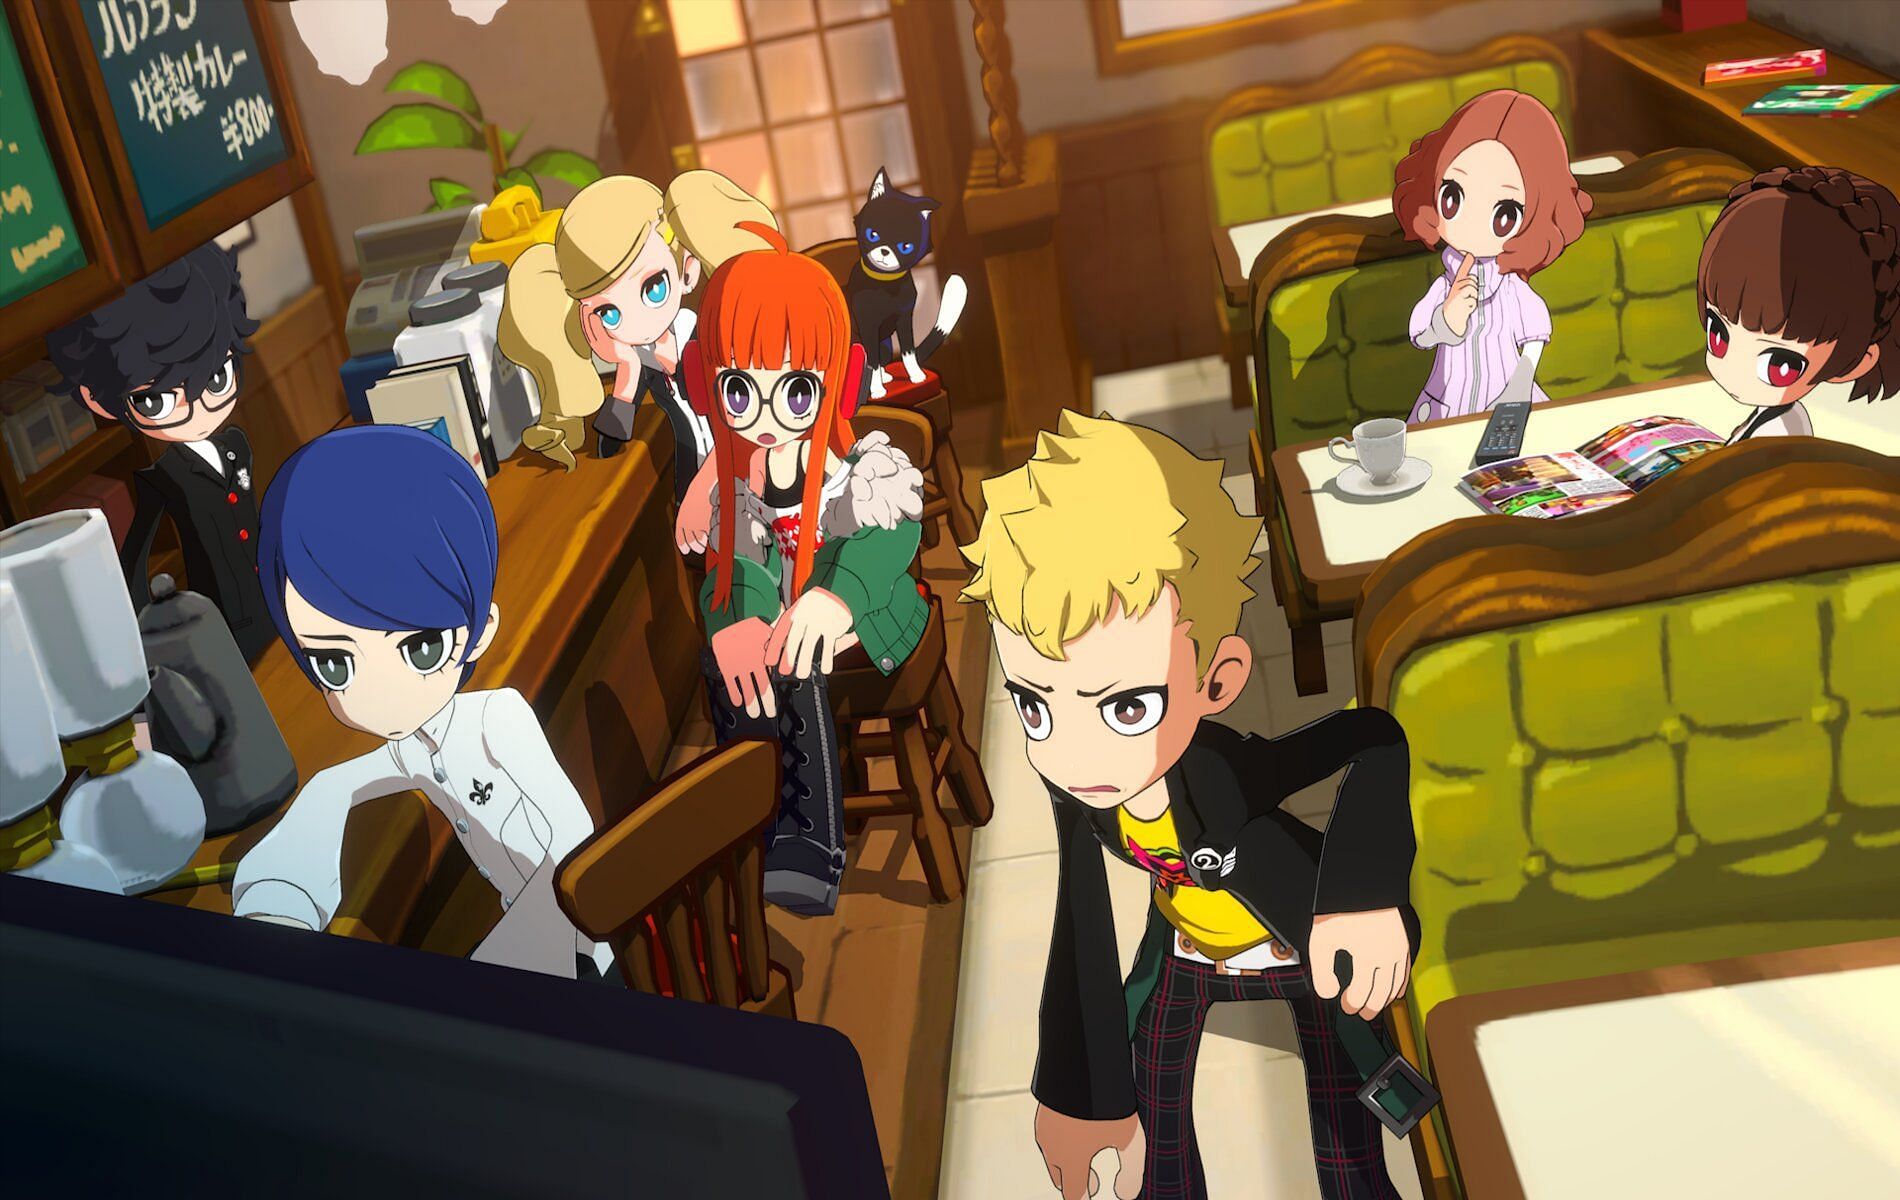 Screenshot from Persona 5 Tactica showing the Phantom Thieves of Heart